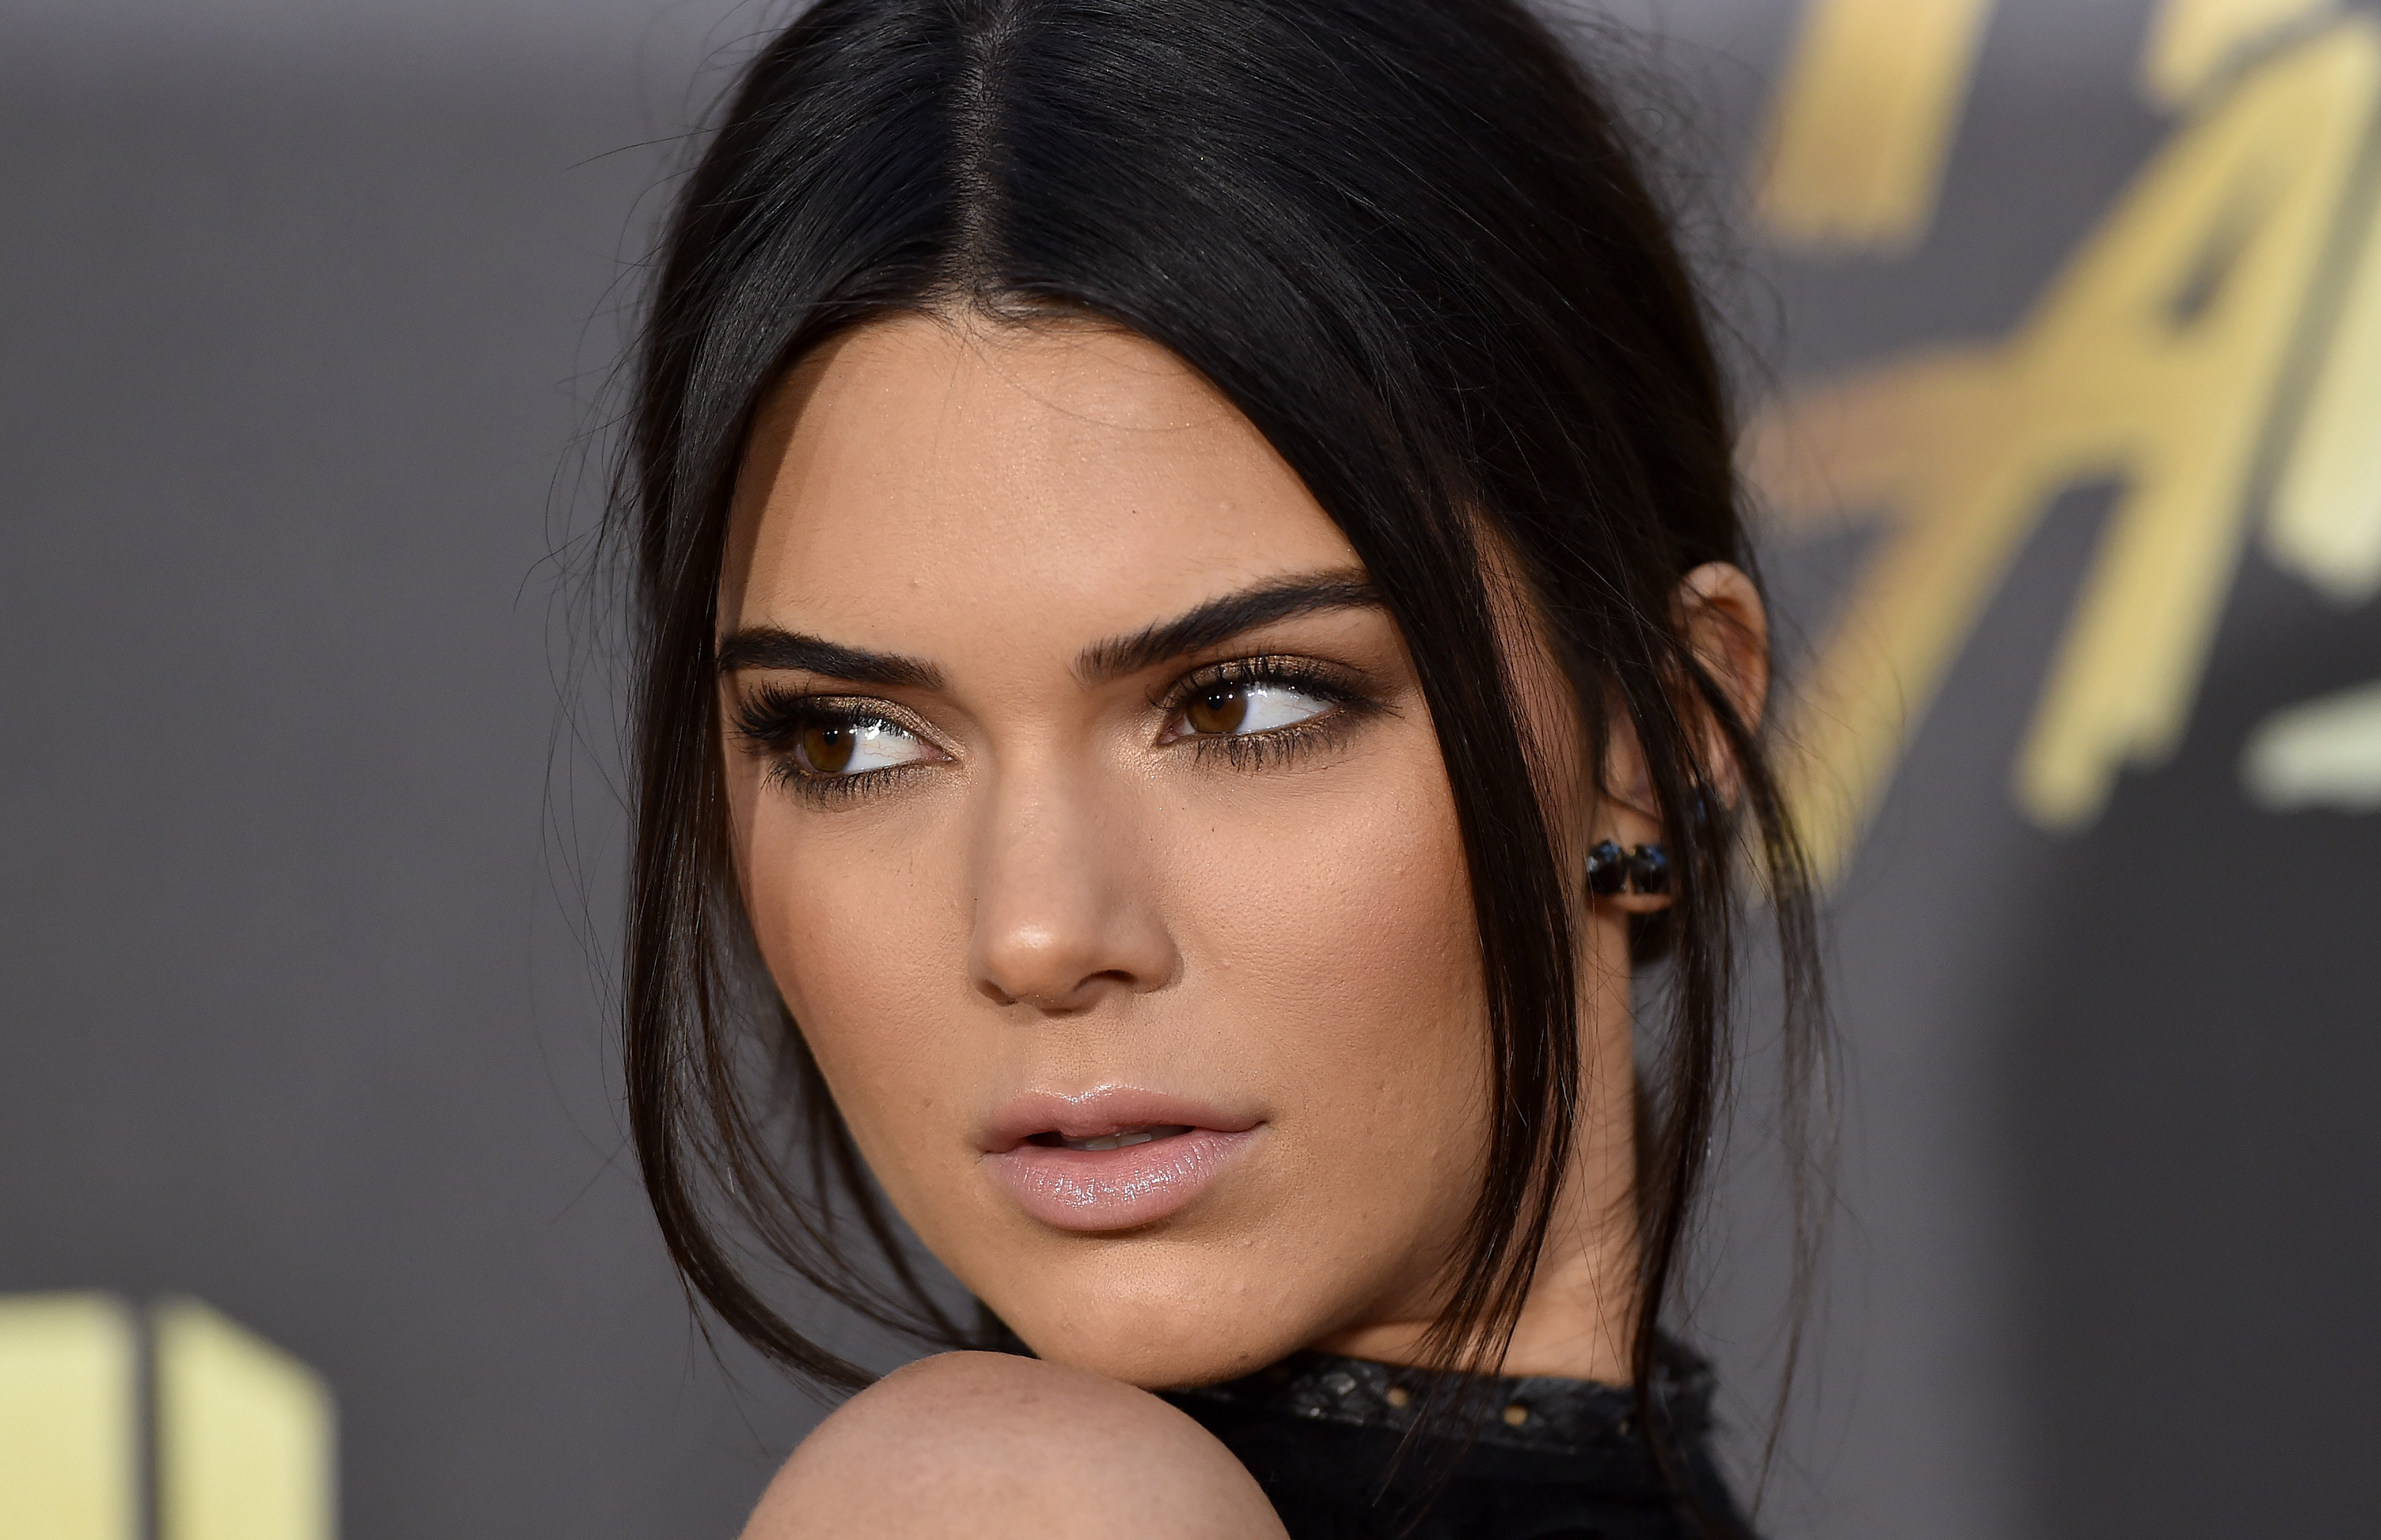 Model Kendall Jenner arrives at the 2016 MTV Movie Awards at Warner Bros. Studios on April 9, 2016 in Burbank, California. (Axelle/Bauer-Griffin—FilmMagic/Getty Images)